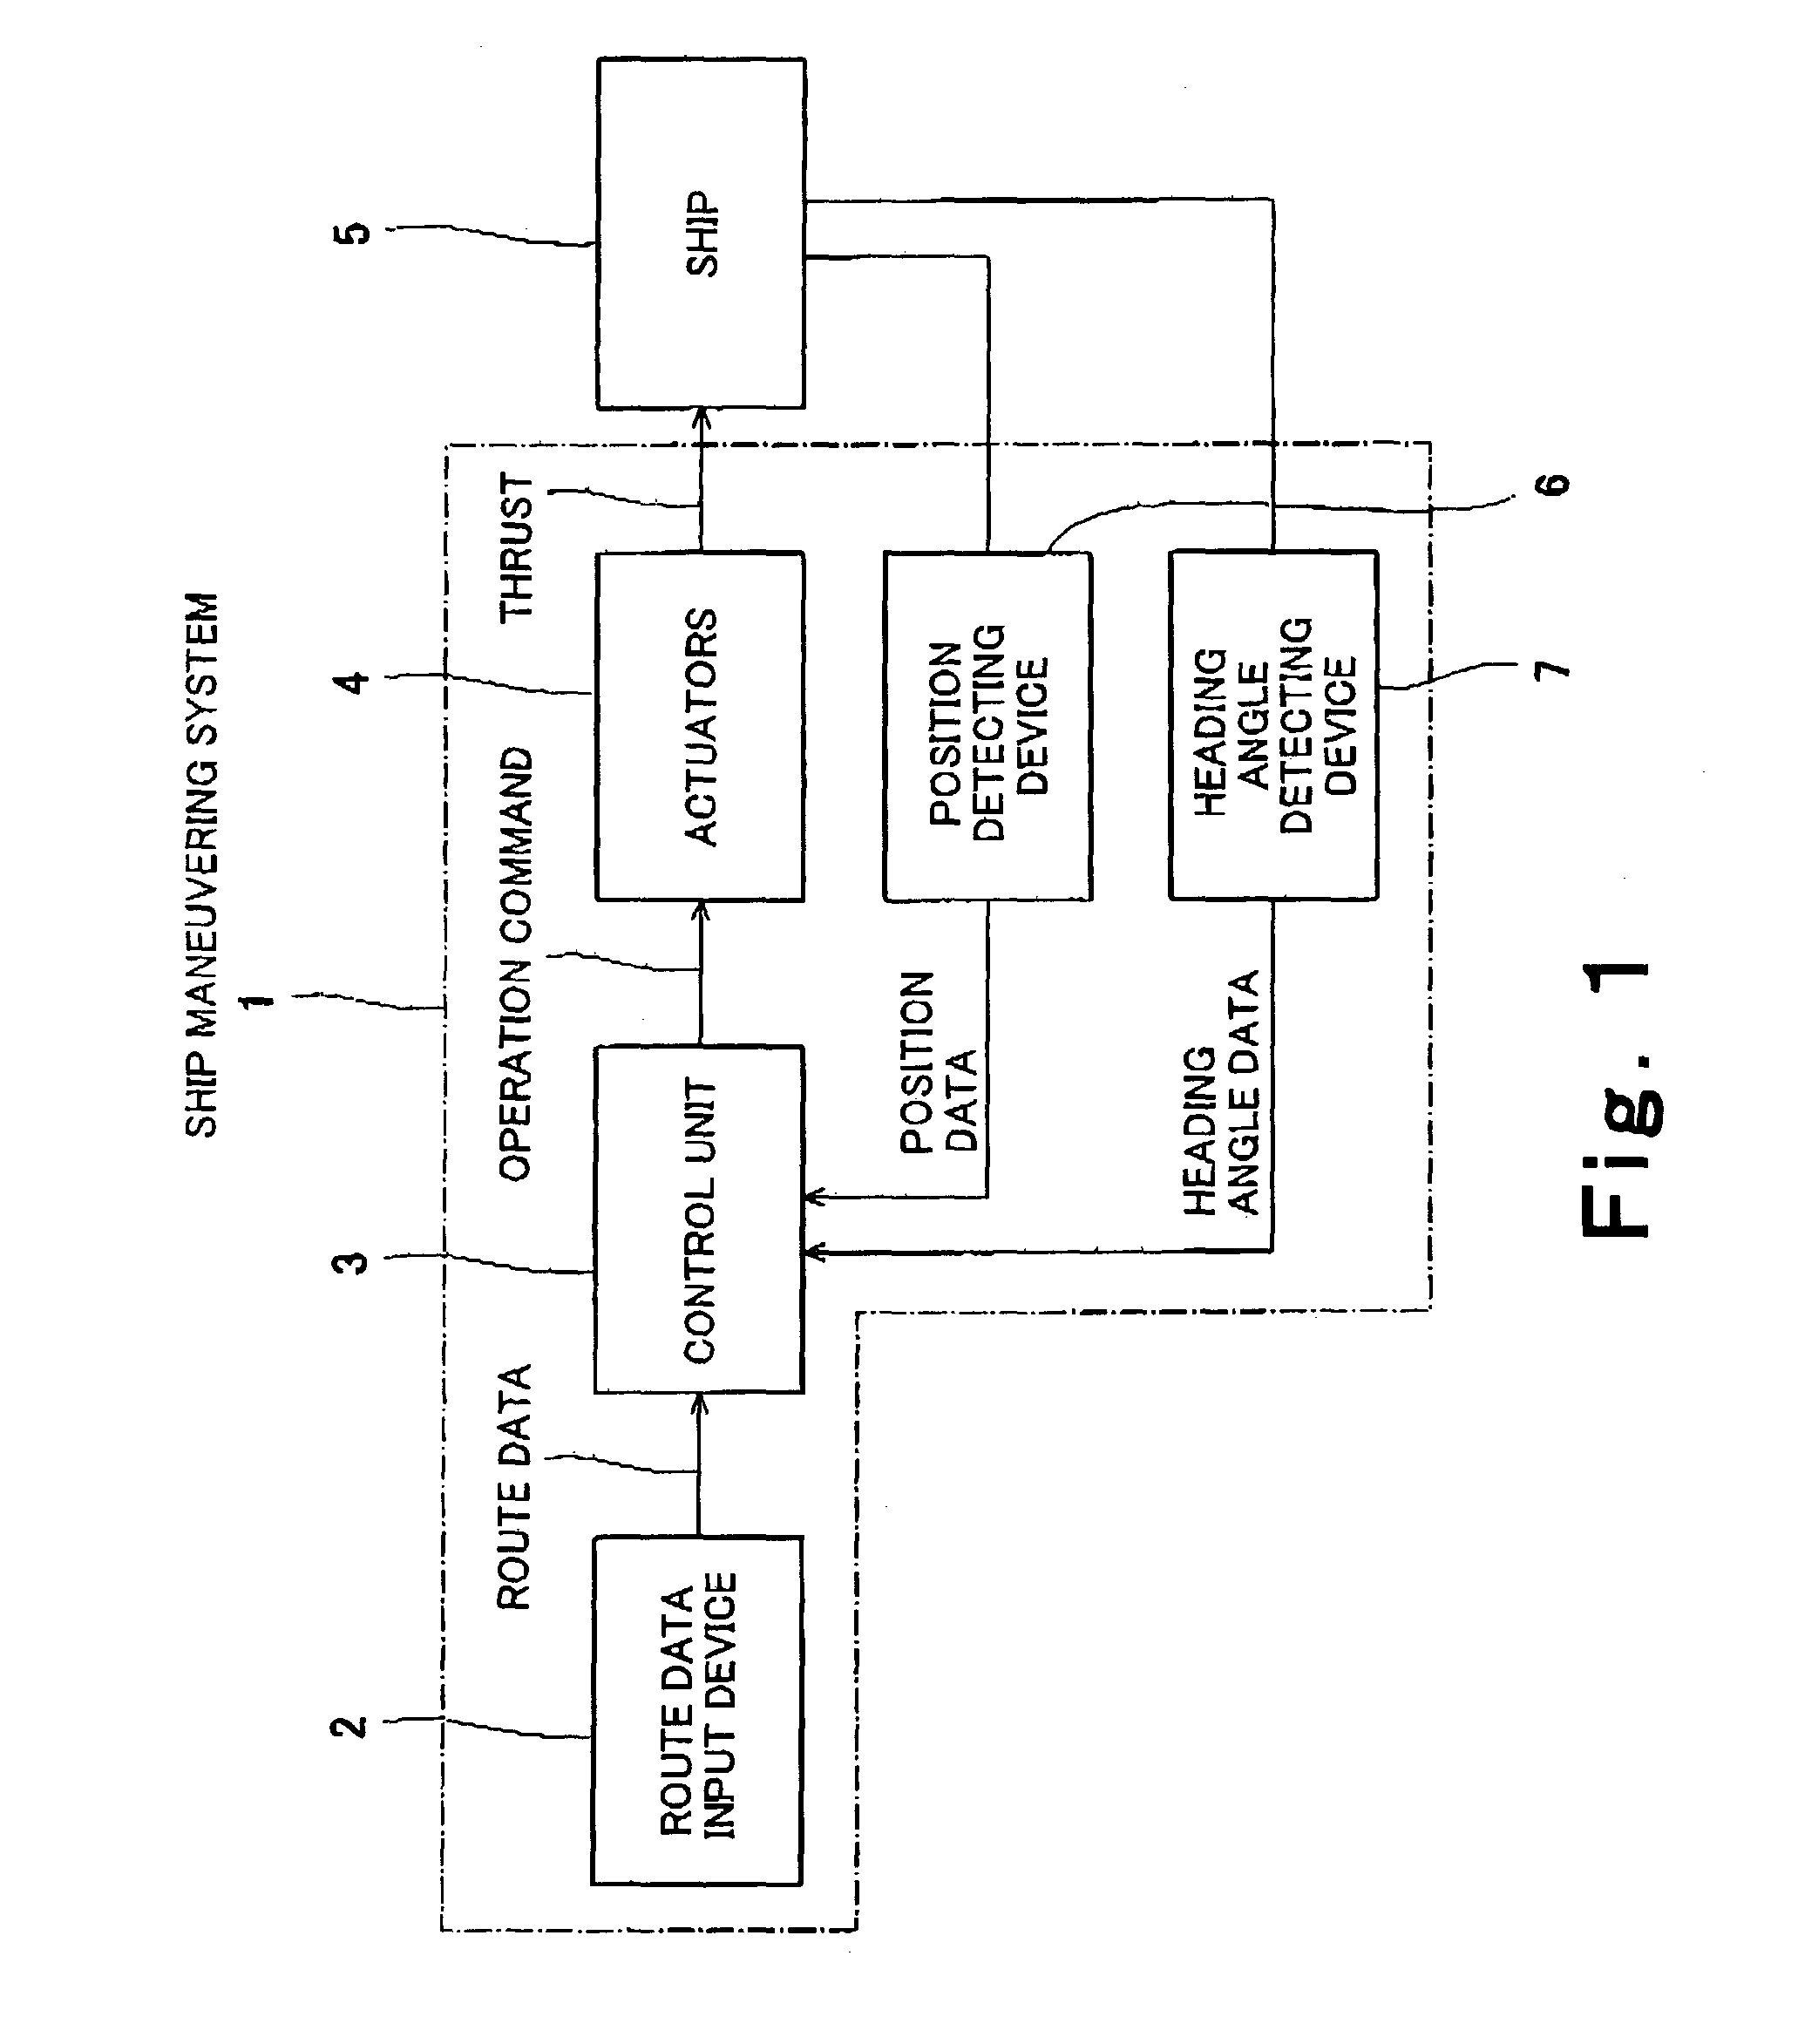 Method and system for maneuvering movable object